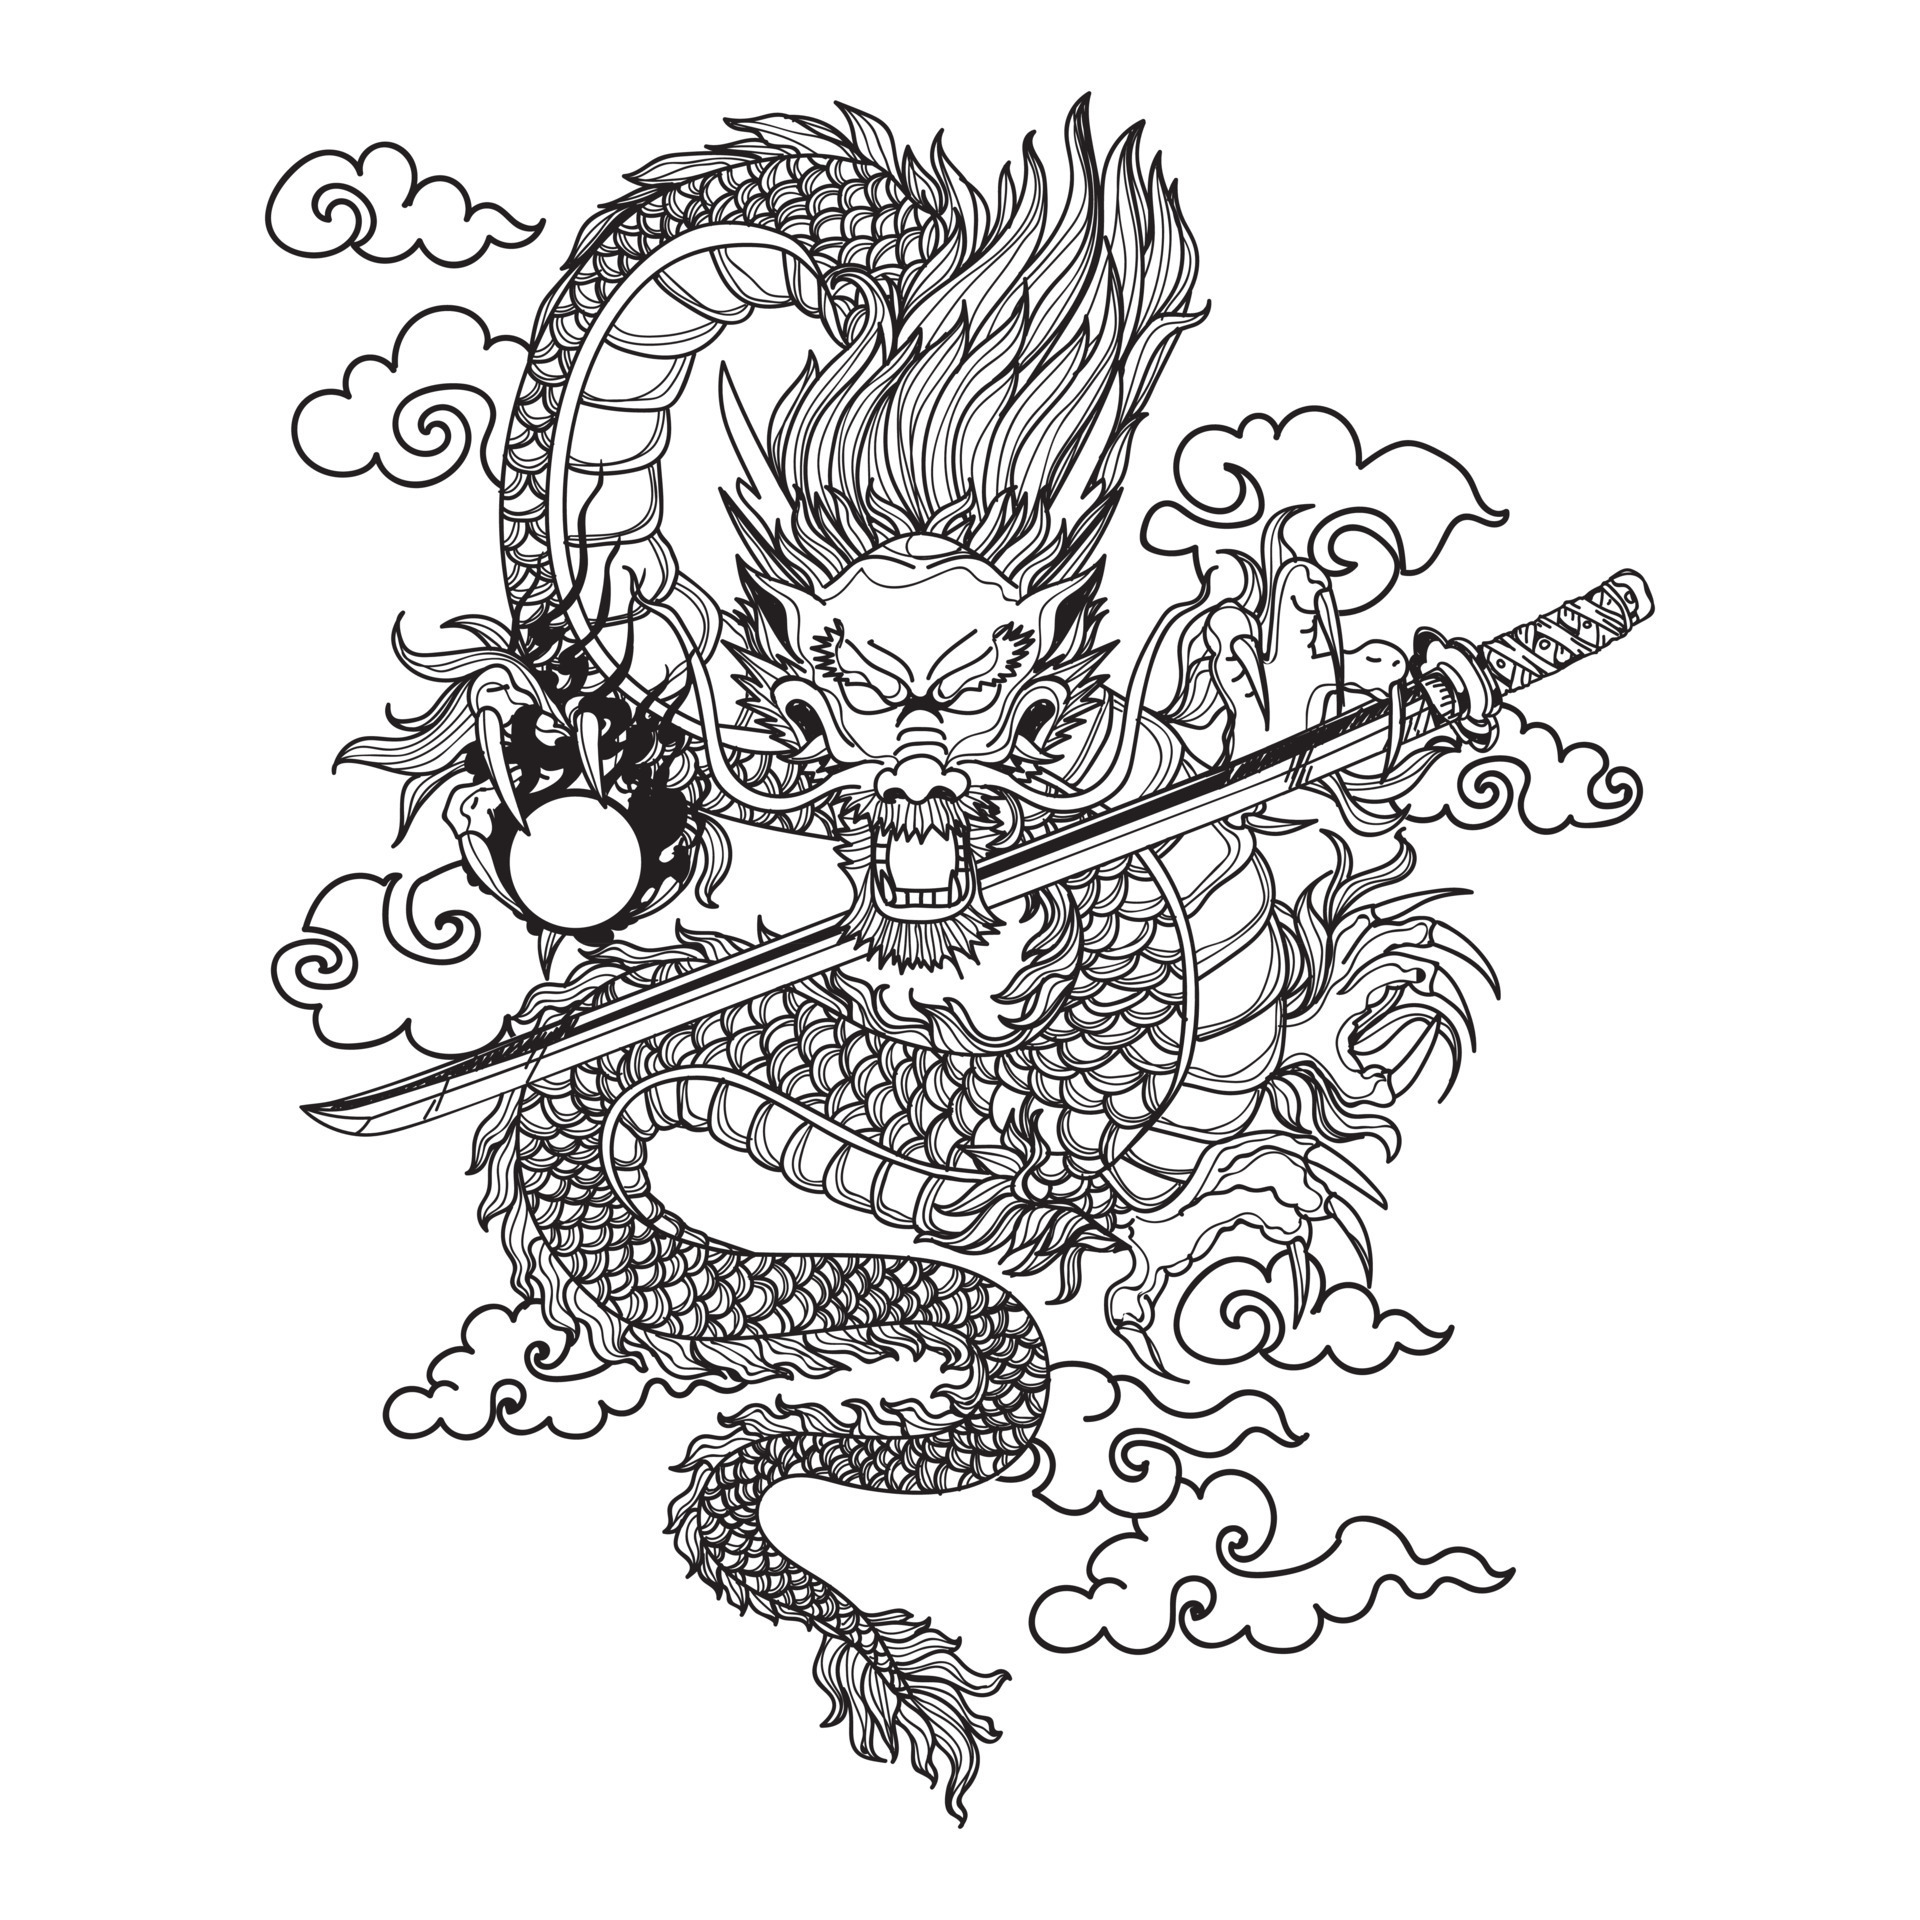 Outline Chinese Dragon Illustration Tattoo Design Stock Vector Royalty  Free 1551706592  Shutterstock